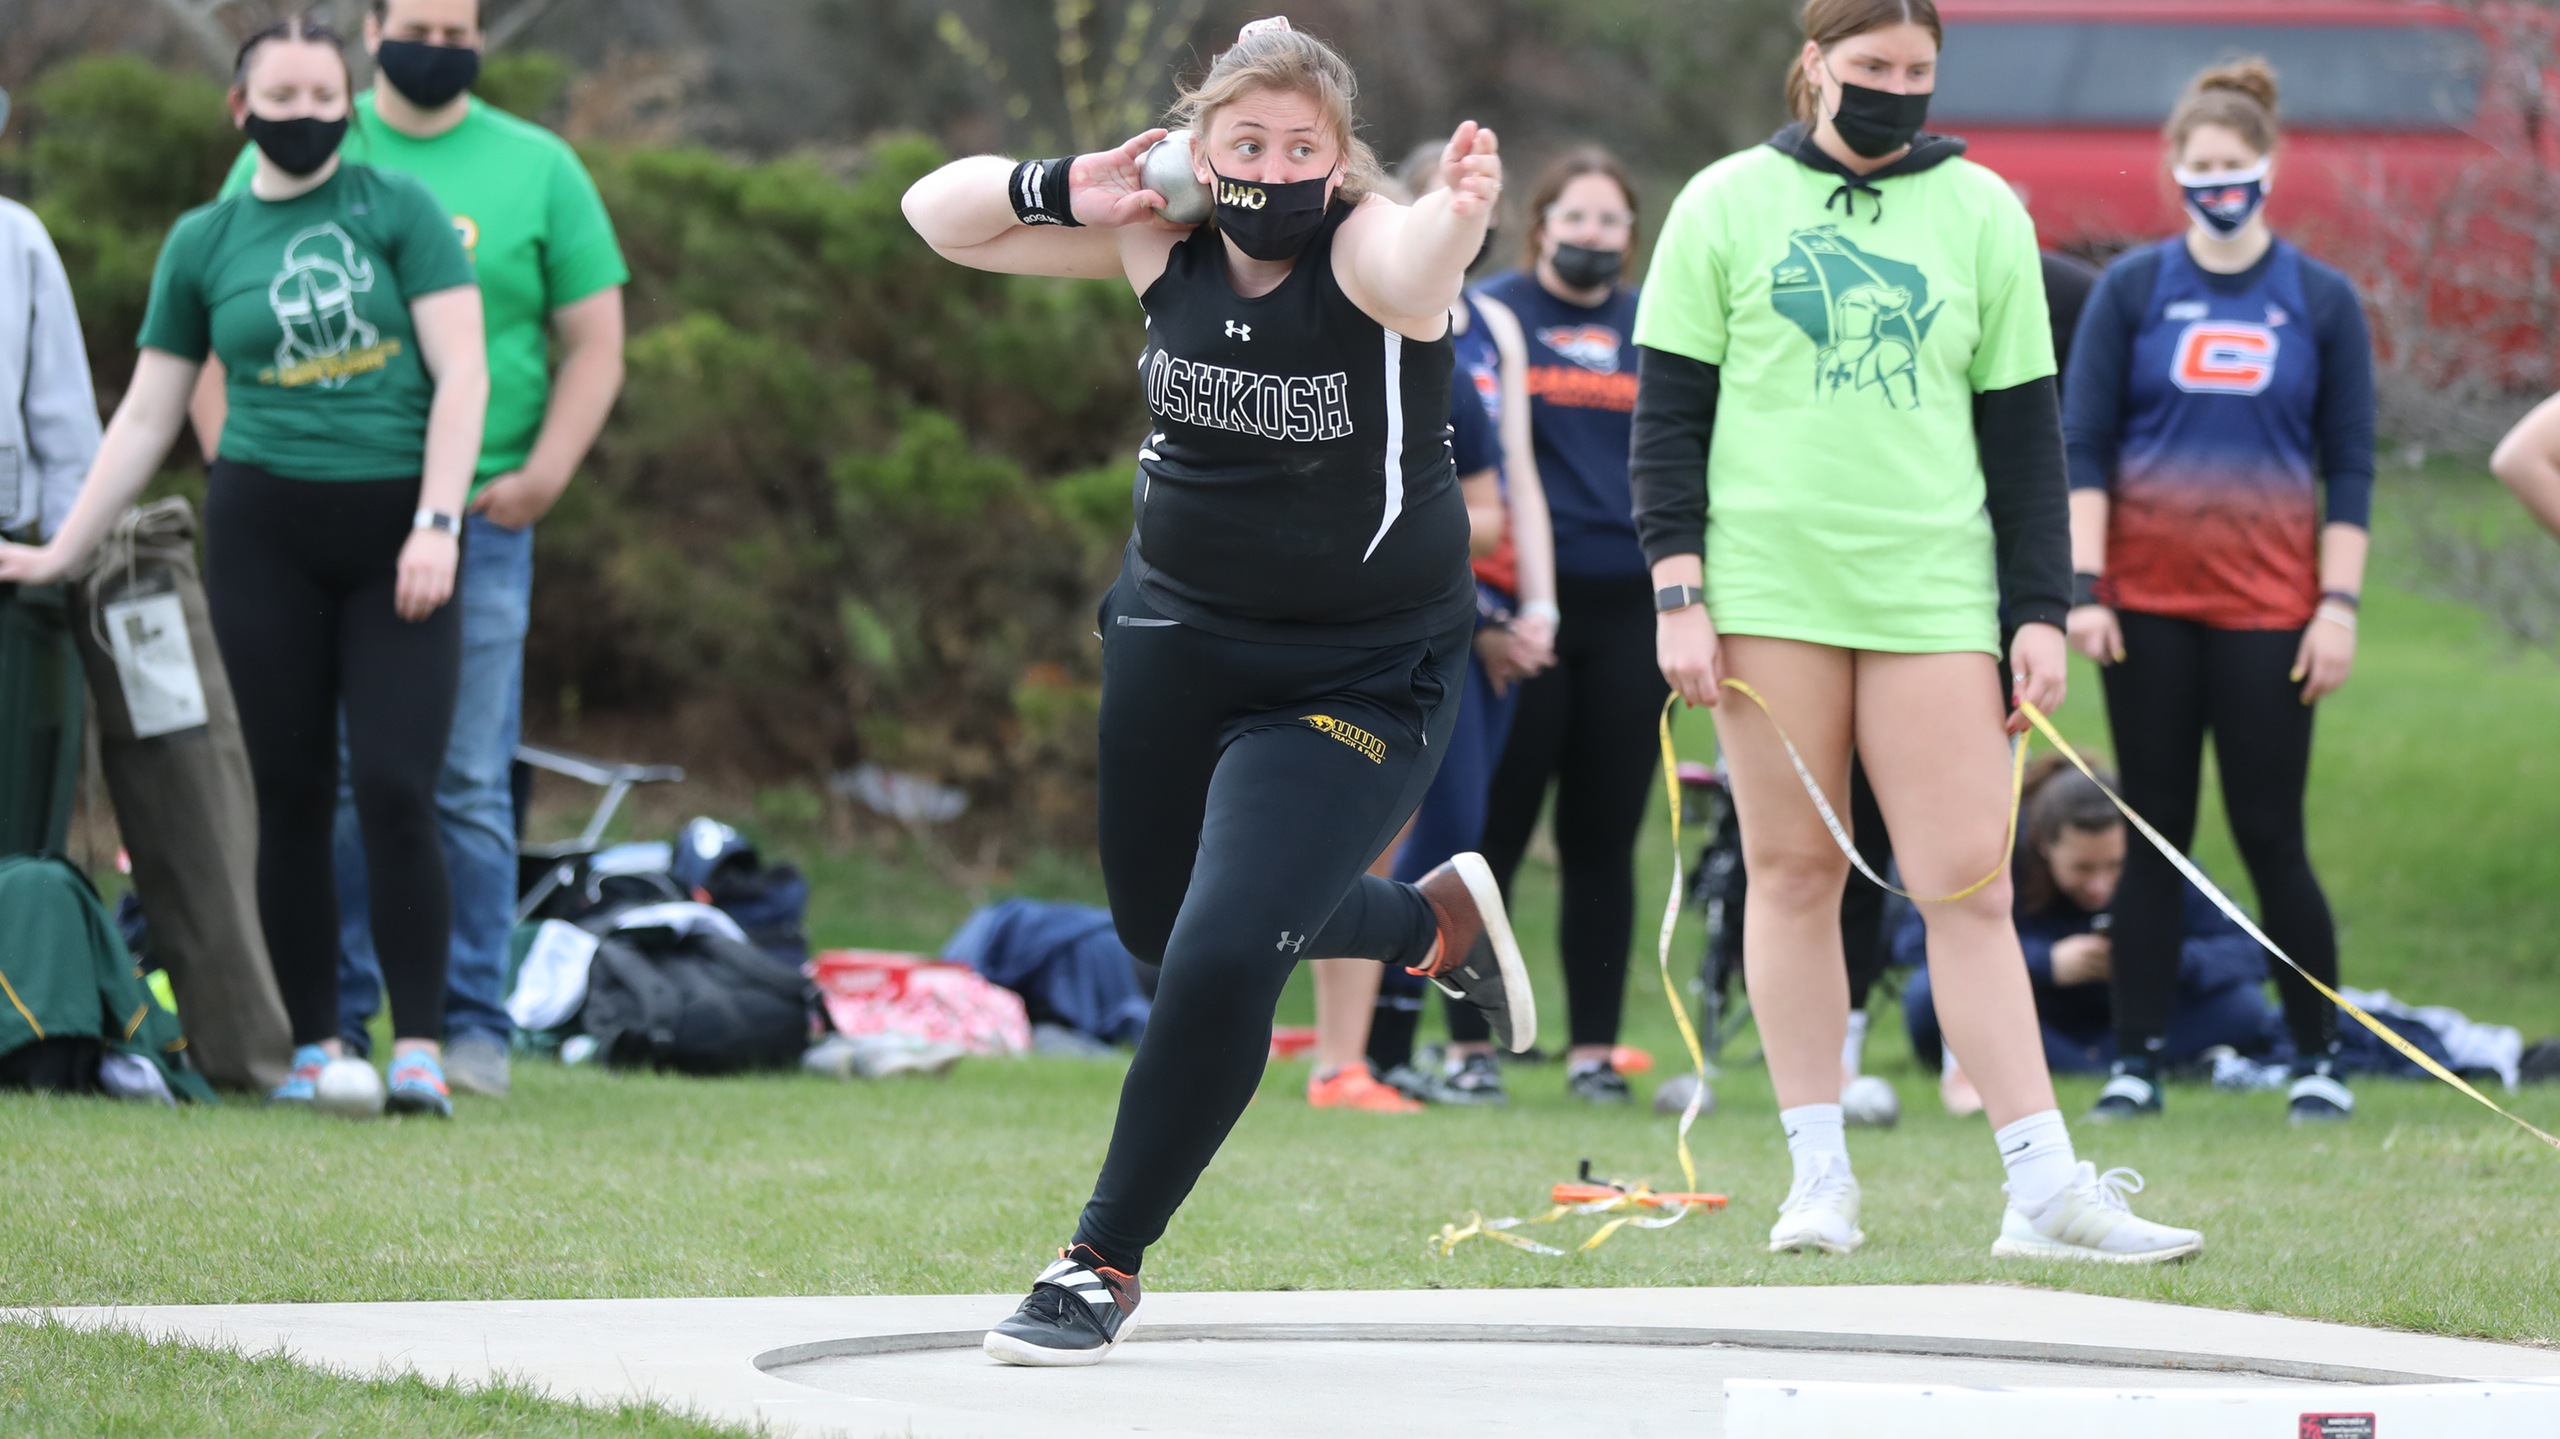 Sydney Thompson won the discus and shot put competitions while placing fifth in the hammer throw at this year's WIAC Championship.